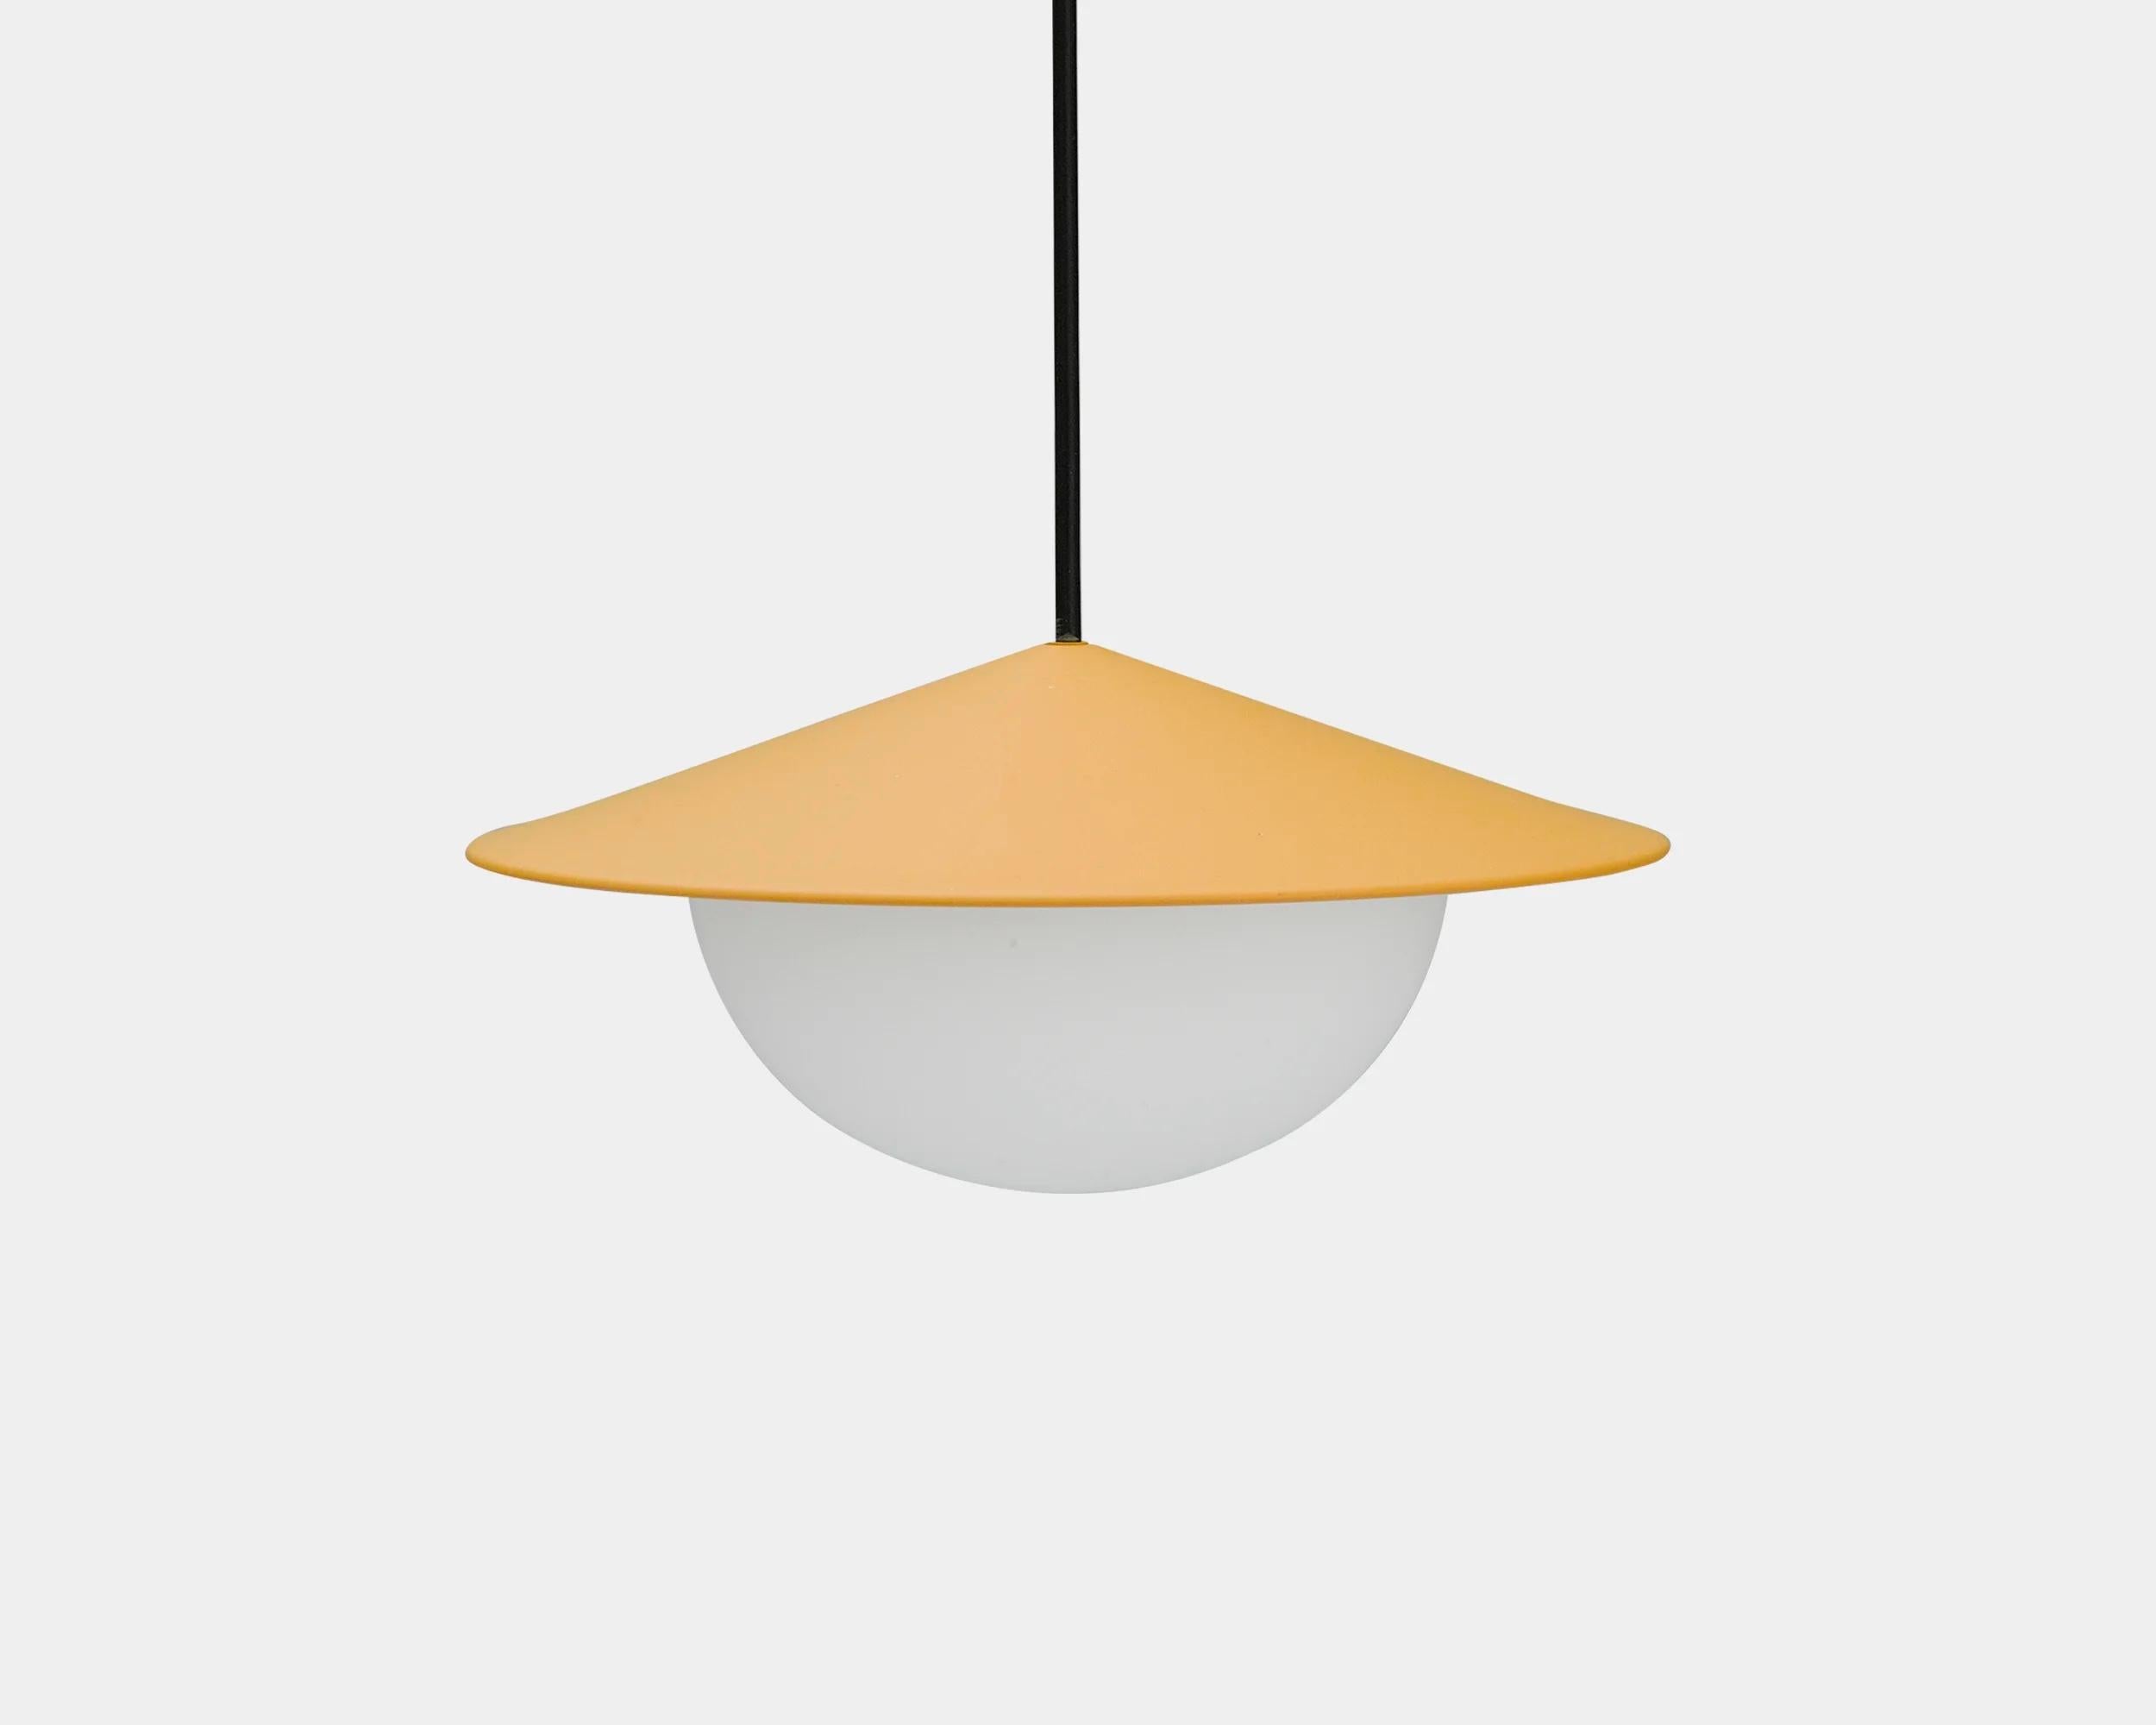 Alley pendant lamp by AGO Lighting
UL Listed

Painted aluminum, white opal glass
LED G9 110-240V (not included)

Available colors:
Charcoal, white, grey, burgundy, green, mustard, dark blue, mud grey, brick red

Dimensions:
15,8 x 34 cm (Large)
11 x